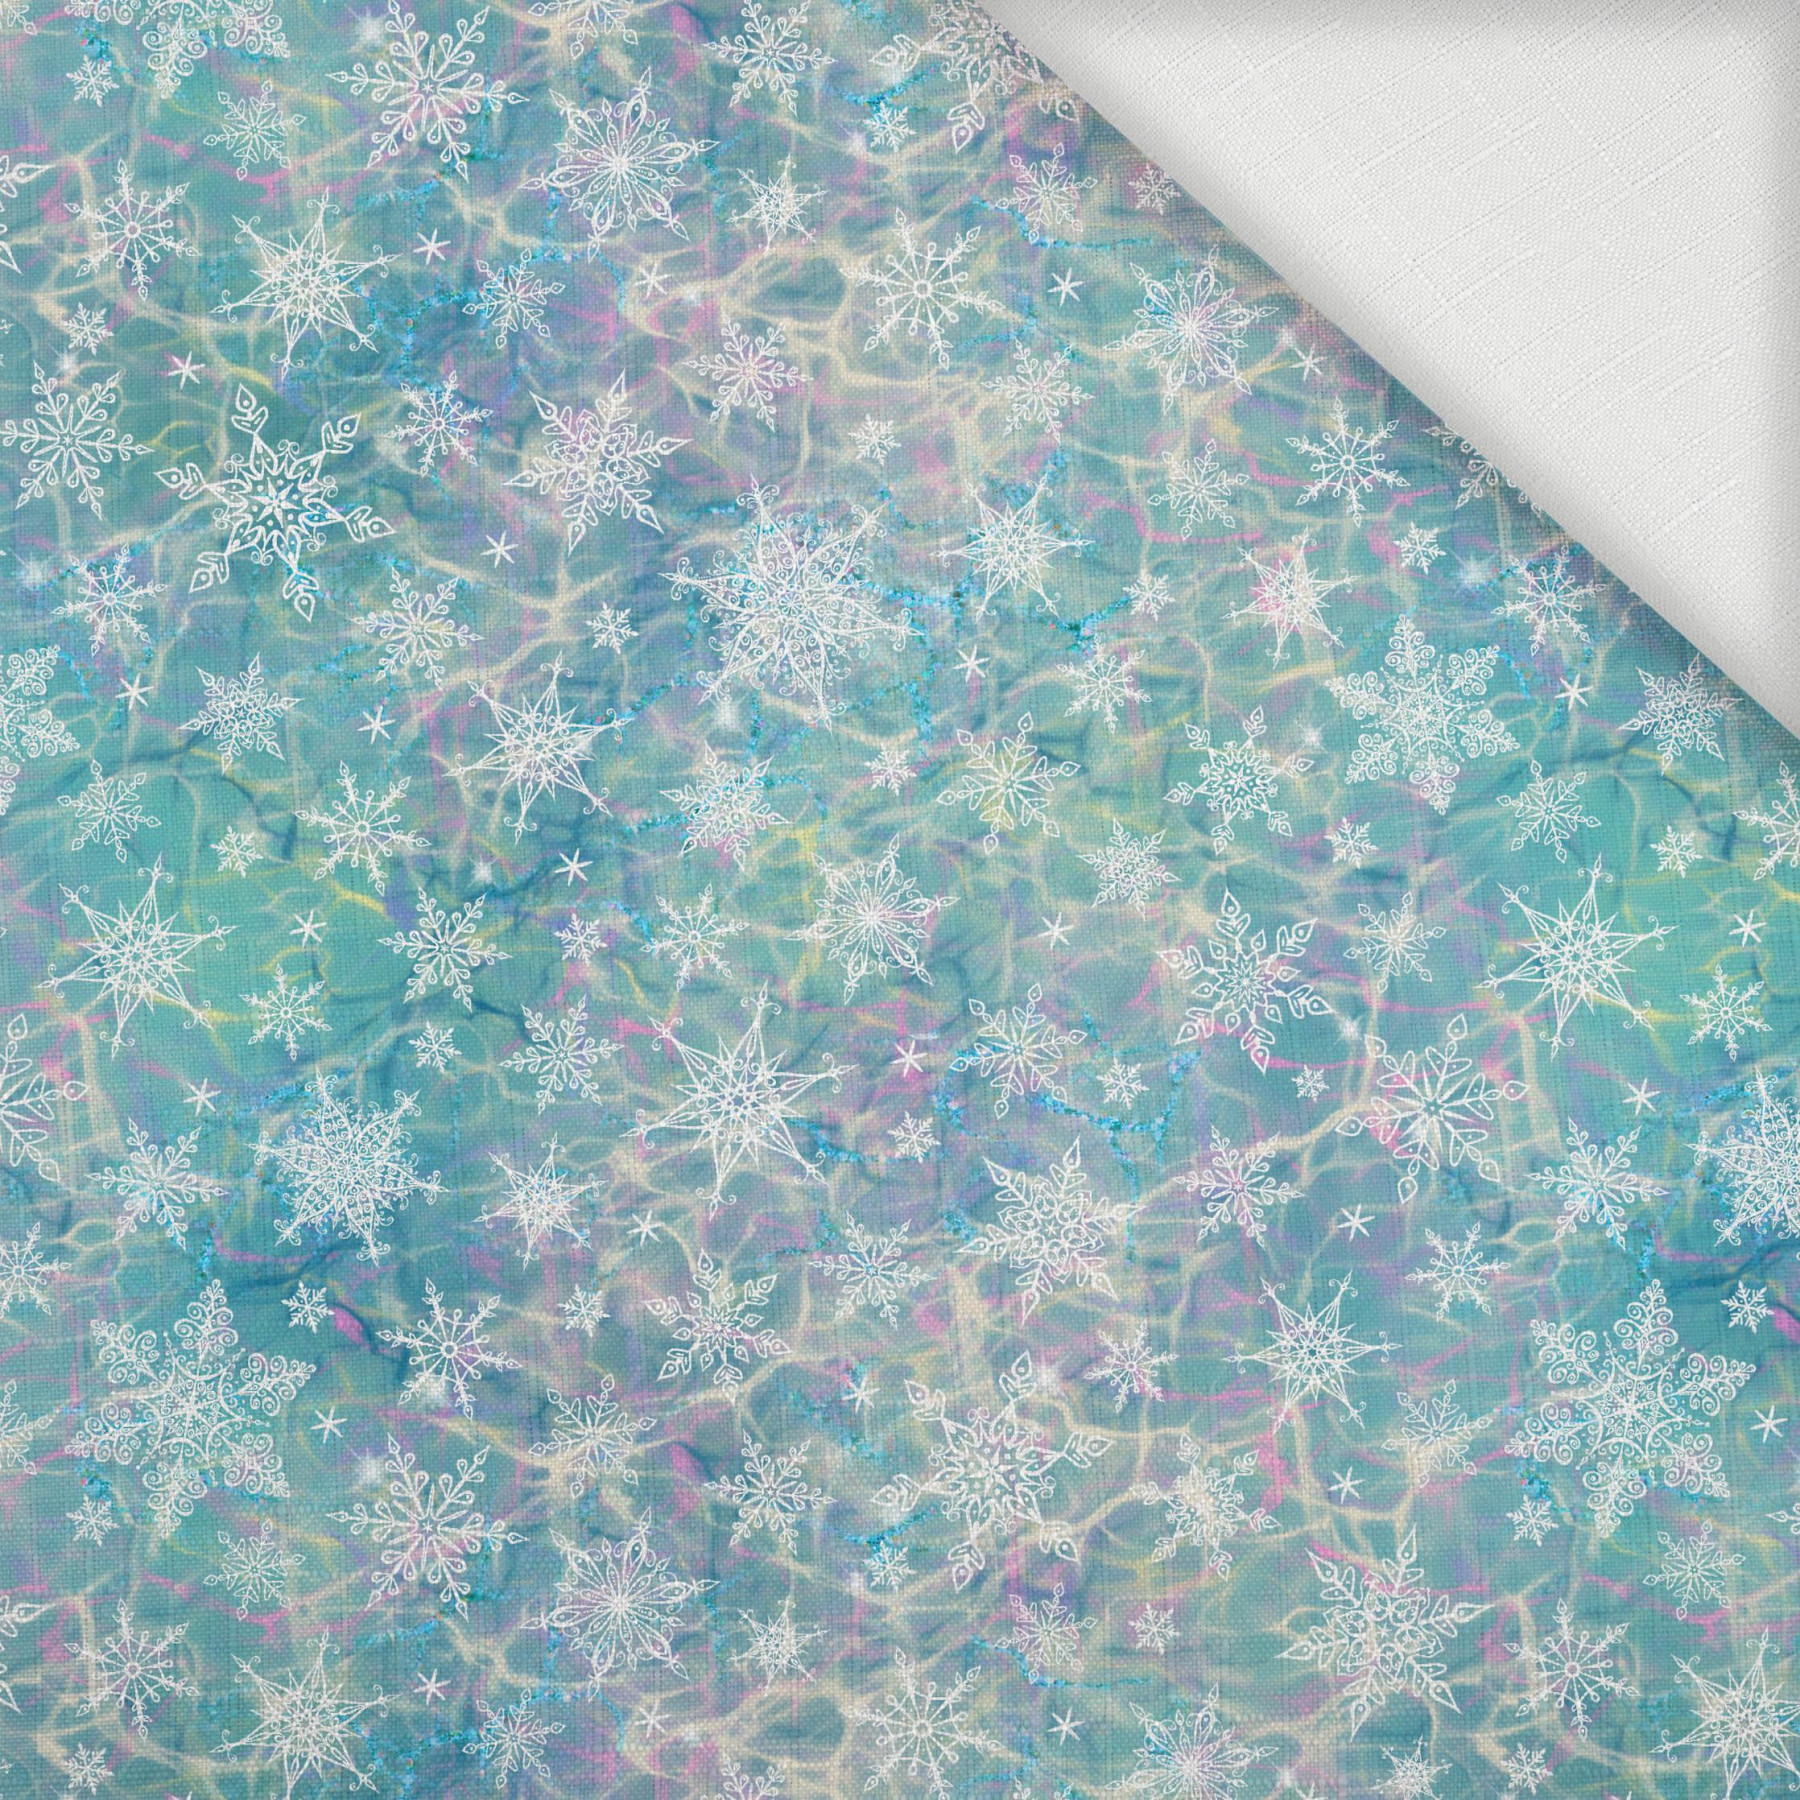 SNOWFLAKES PAT. 2 / RAINBOW OCEAN pat. 2 - Woven Fabric for tablecloths